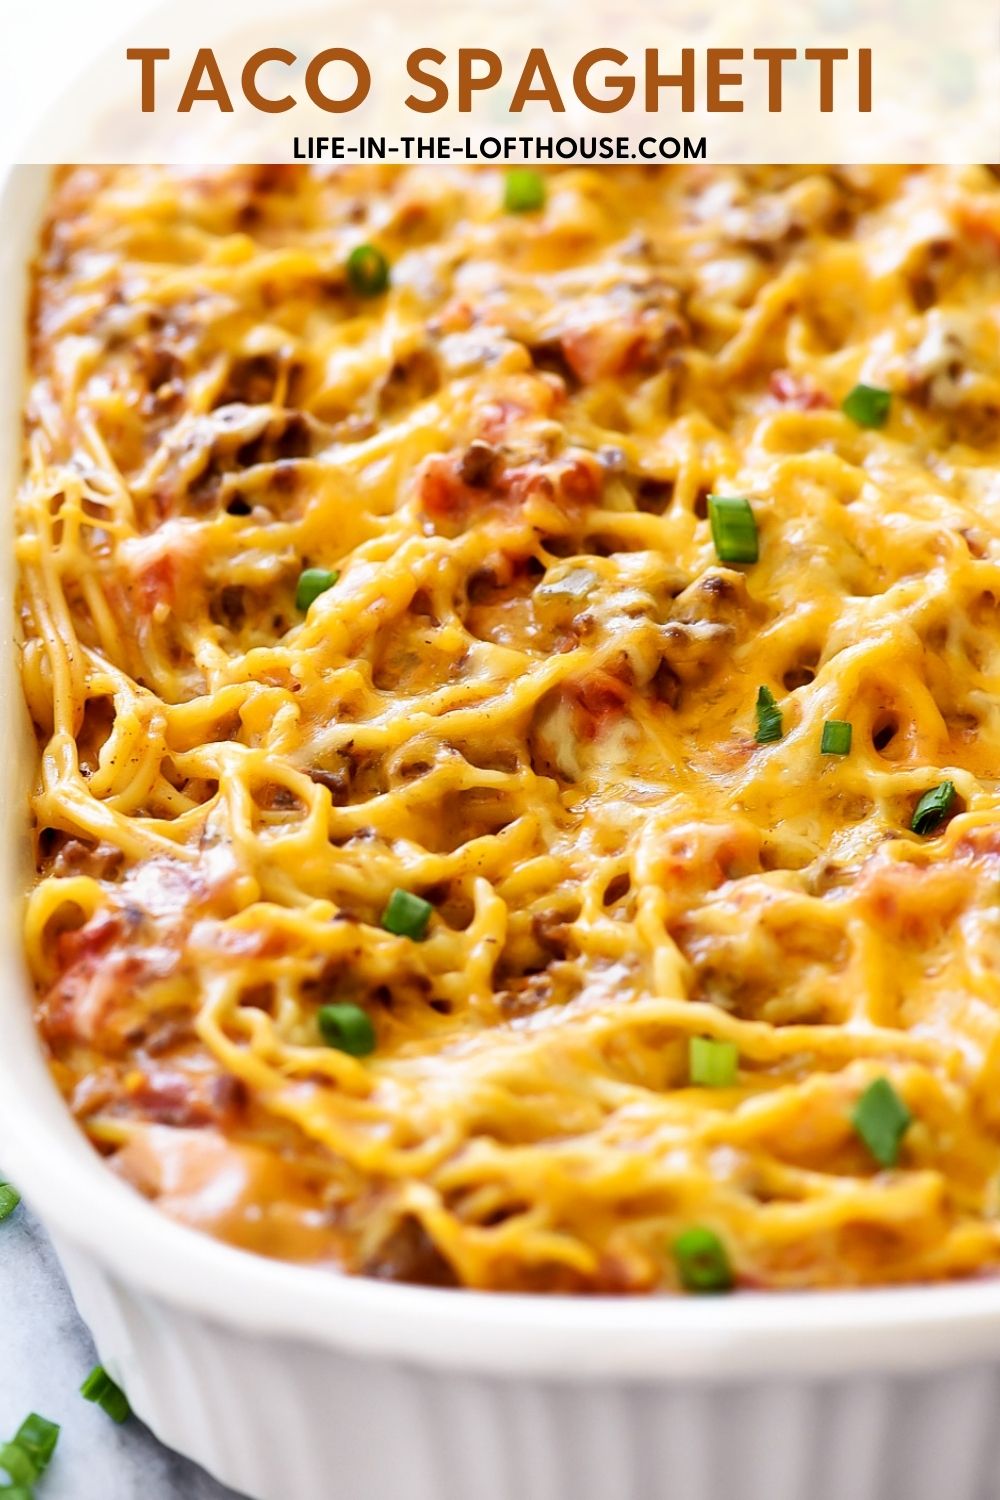 Taco Spaghetti is filled with ground beef, tomatoes, green chilies, taco seasonings and cheese with spaghetti noodles.